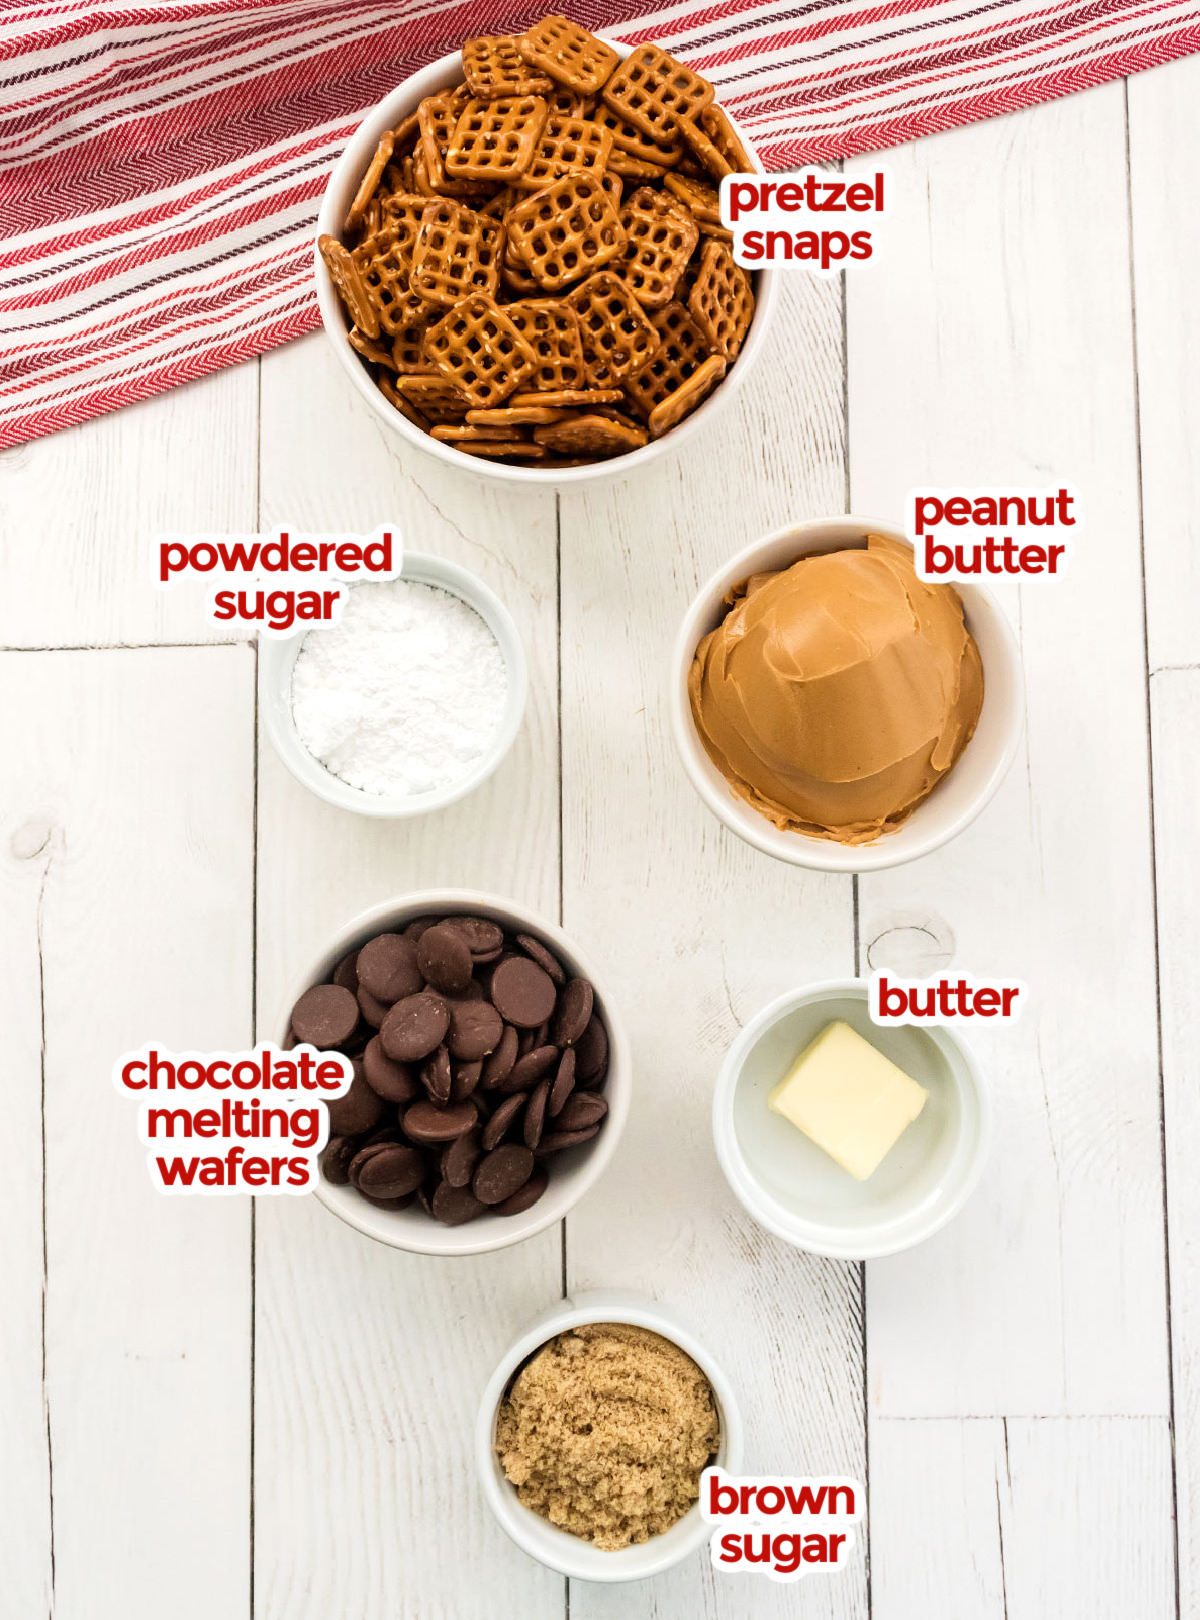 All the ingredients you will need to make Chocolate Peanut Butter Pretzel Bites including Pretzel Snaps, Powdered Sugar, Peanut Butter, Chocolate Melting Wafers, Butter and Brown Sugar.